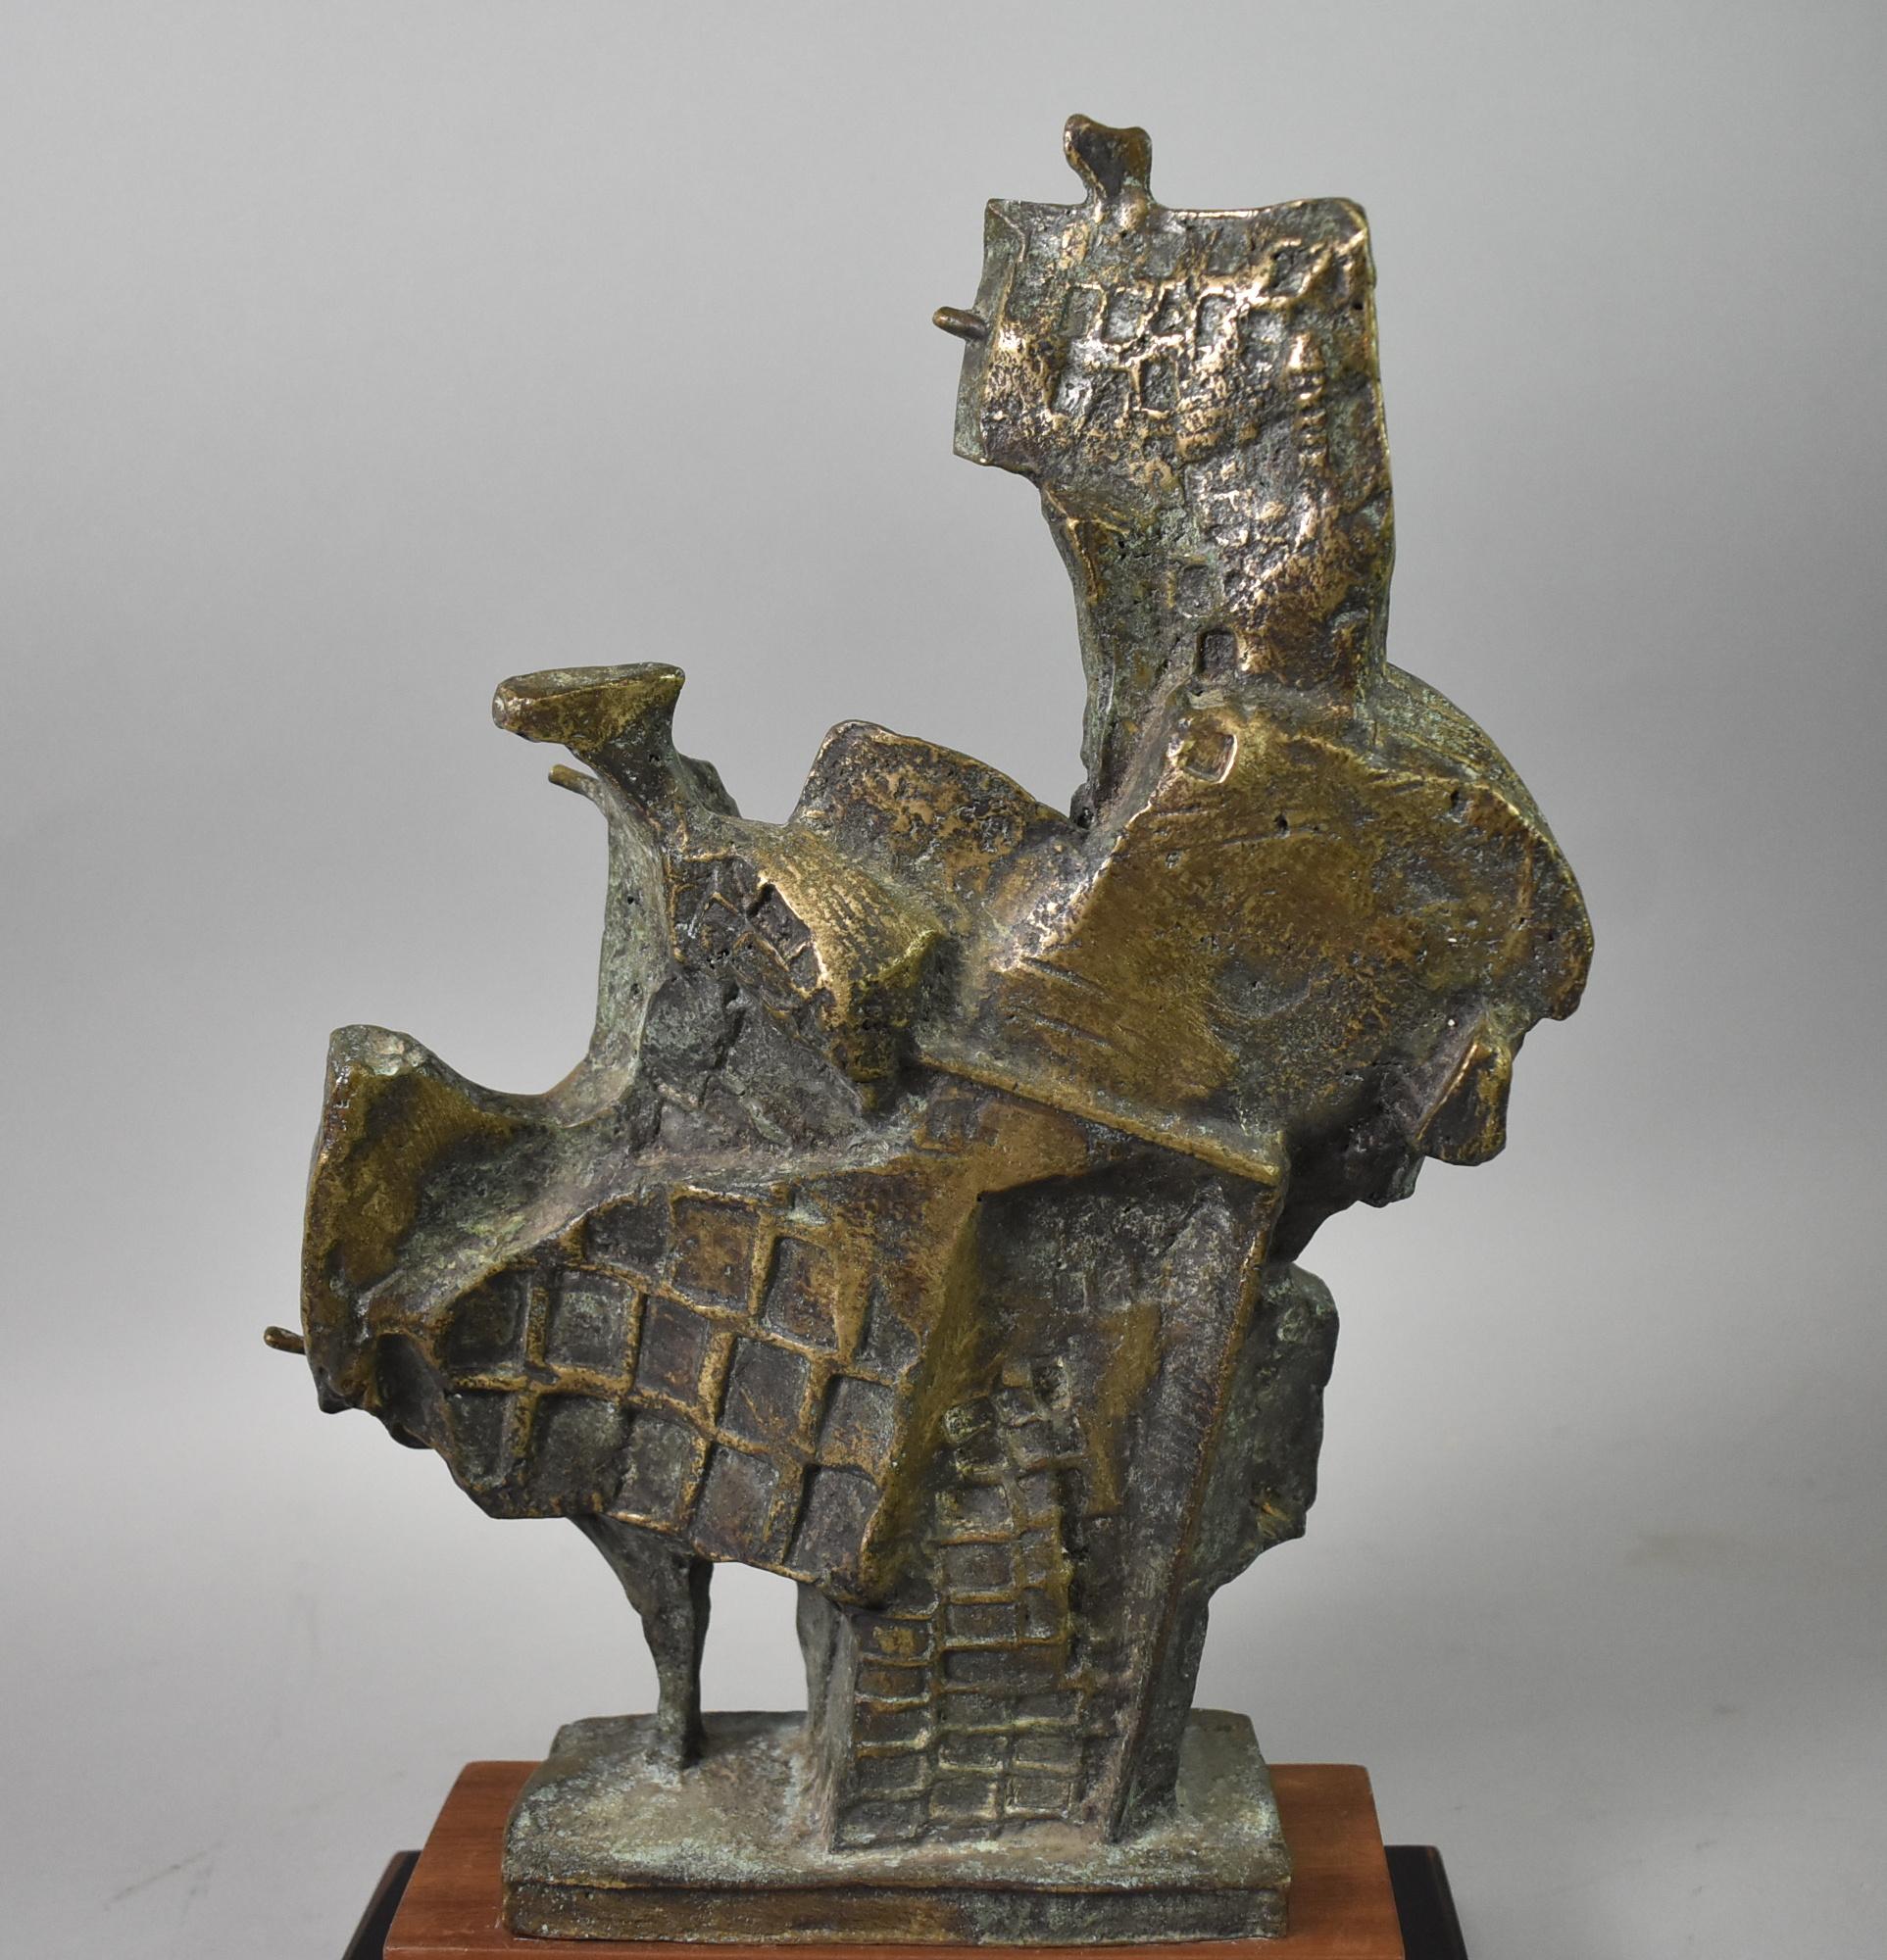 Signed nice patina. Carole Harrison (10/30/33 - 4/4/22) - Born in Illinois, Carole studied at Cranbrook Academy of Arts in 1955/56, Bloomfield Hills, MI, obtaining her Masters, she was awarded a Fulbright Scholarship to study sculpture at Central